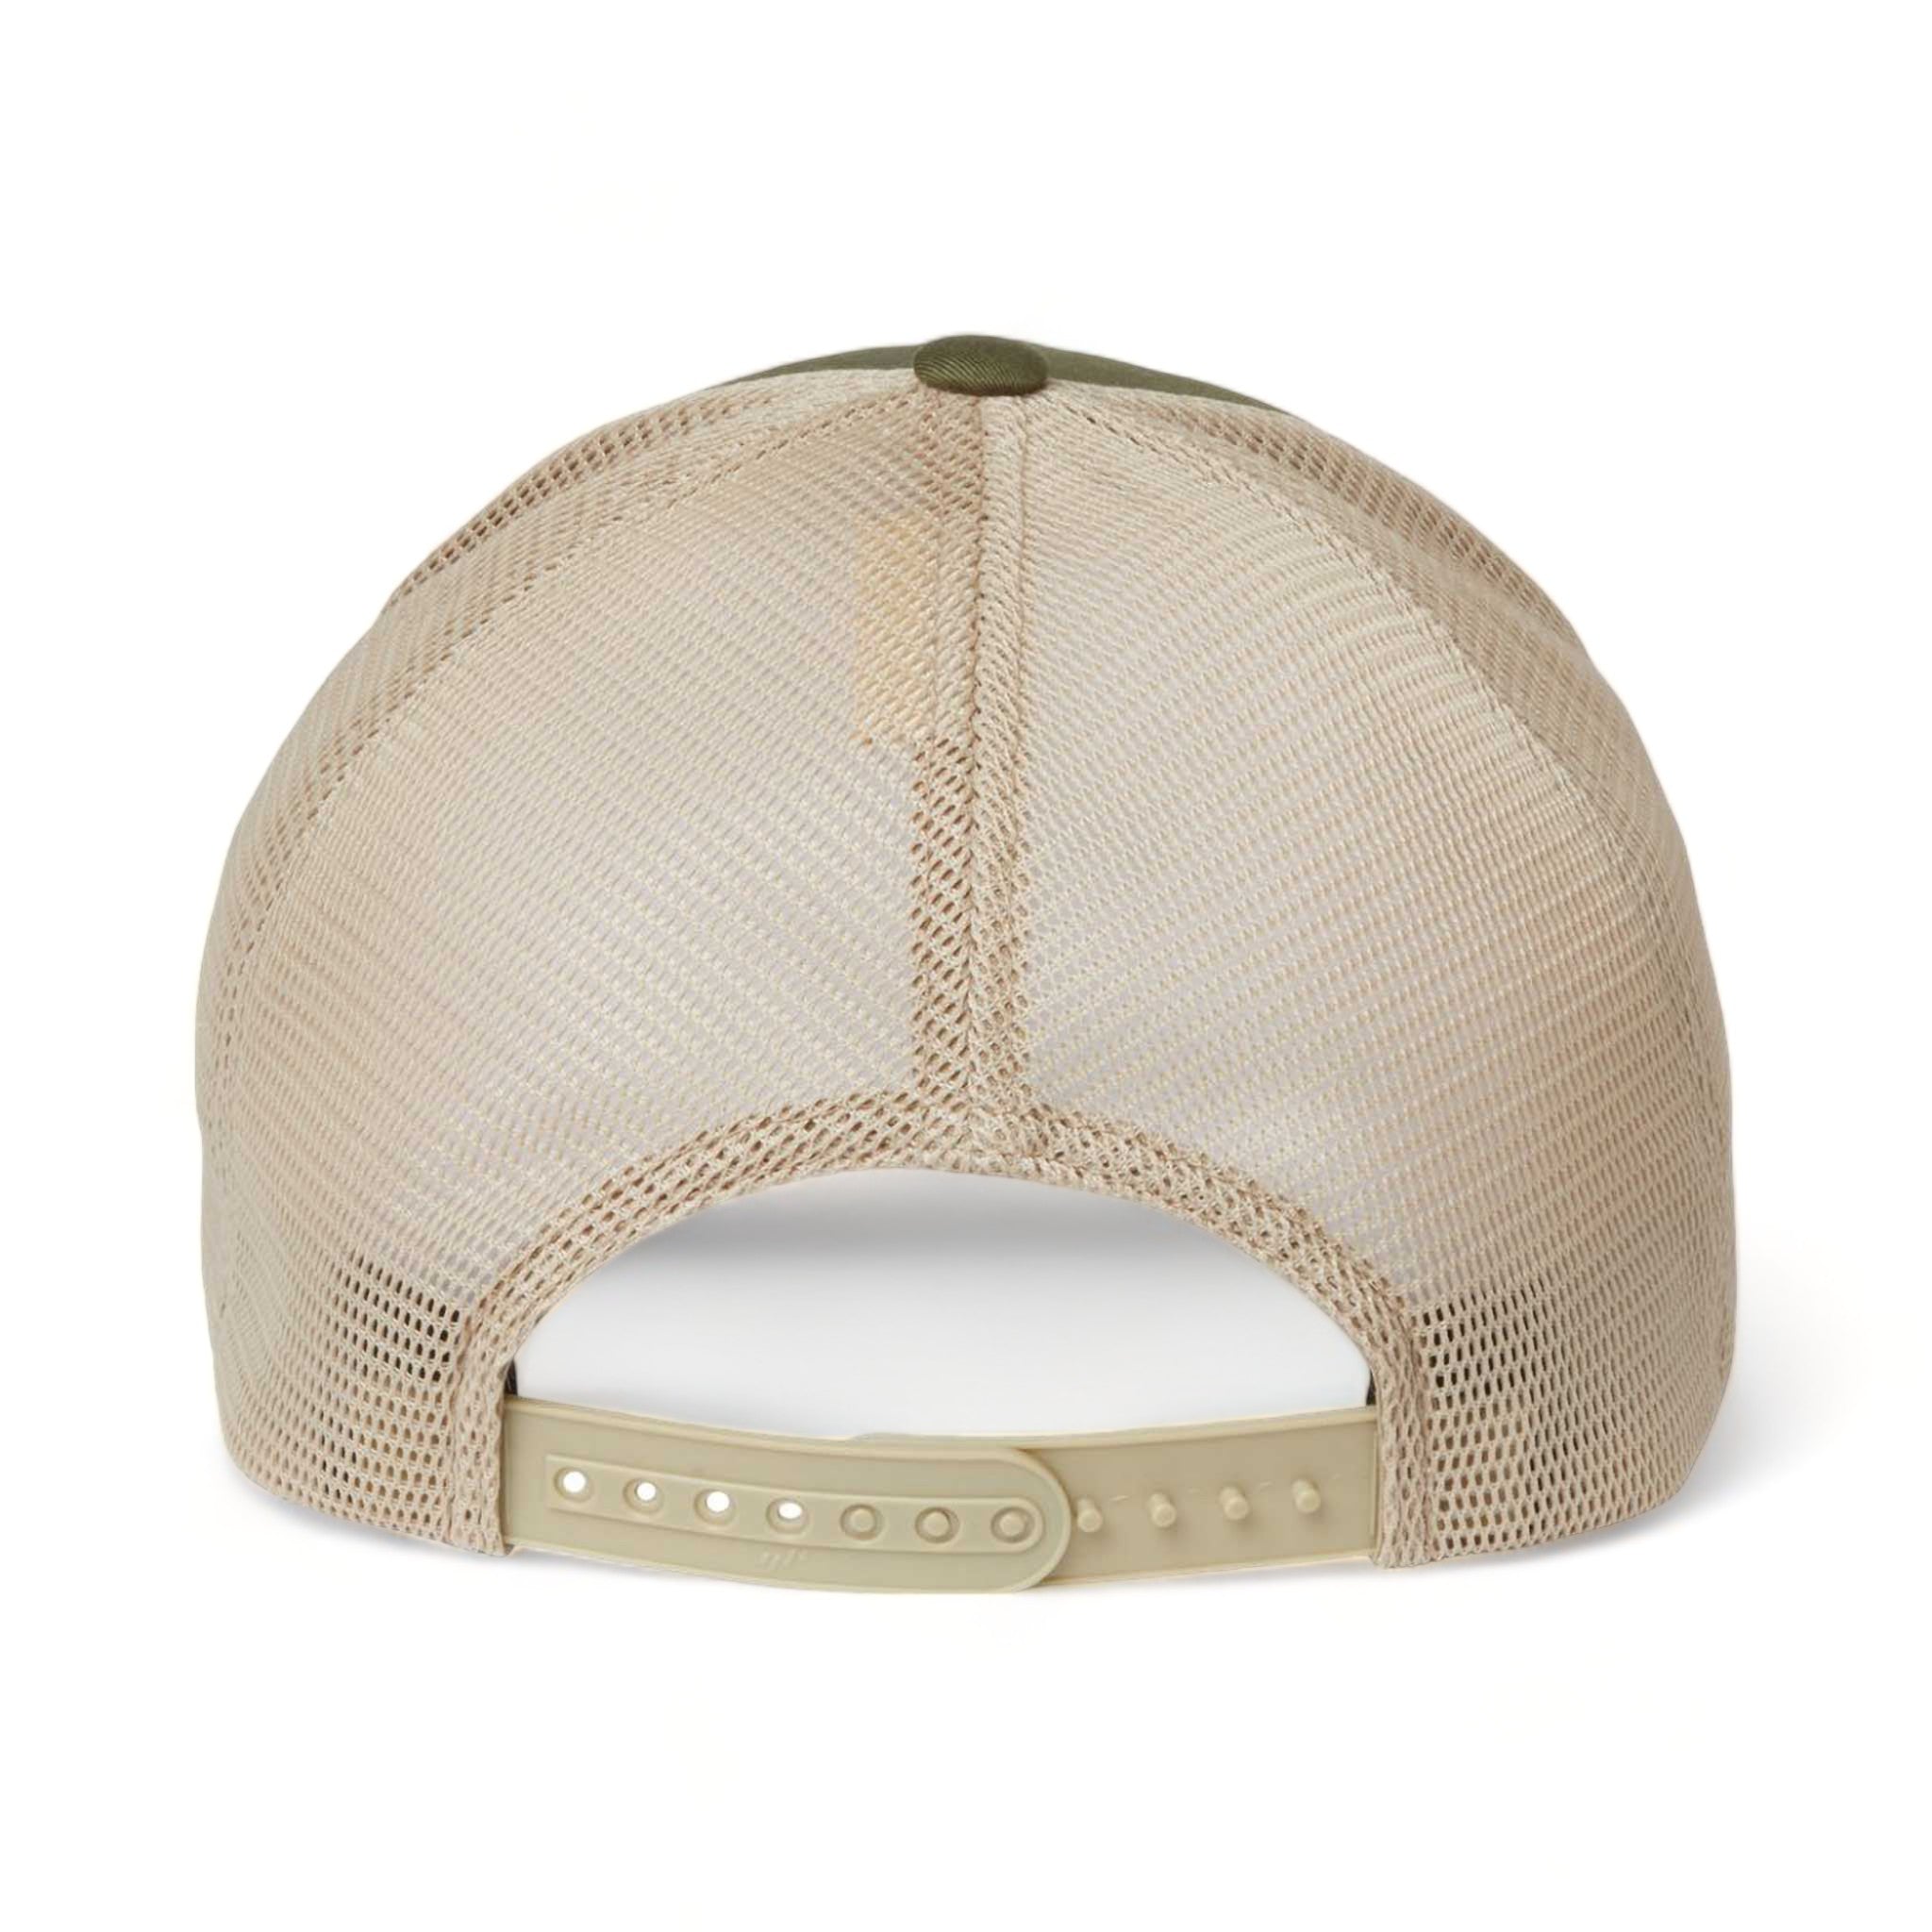 Back view of Flexfit 110M custom hat in olive and khaki